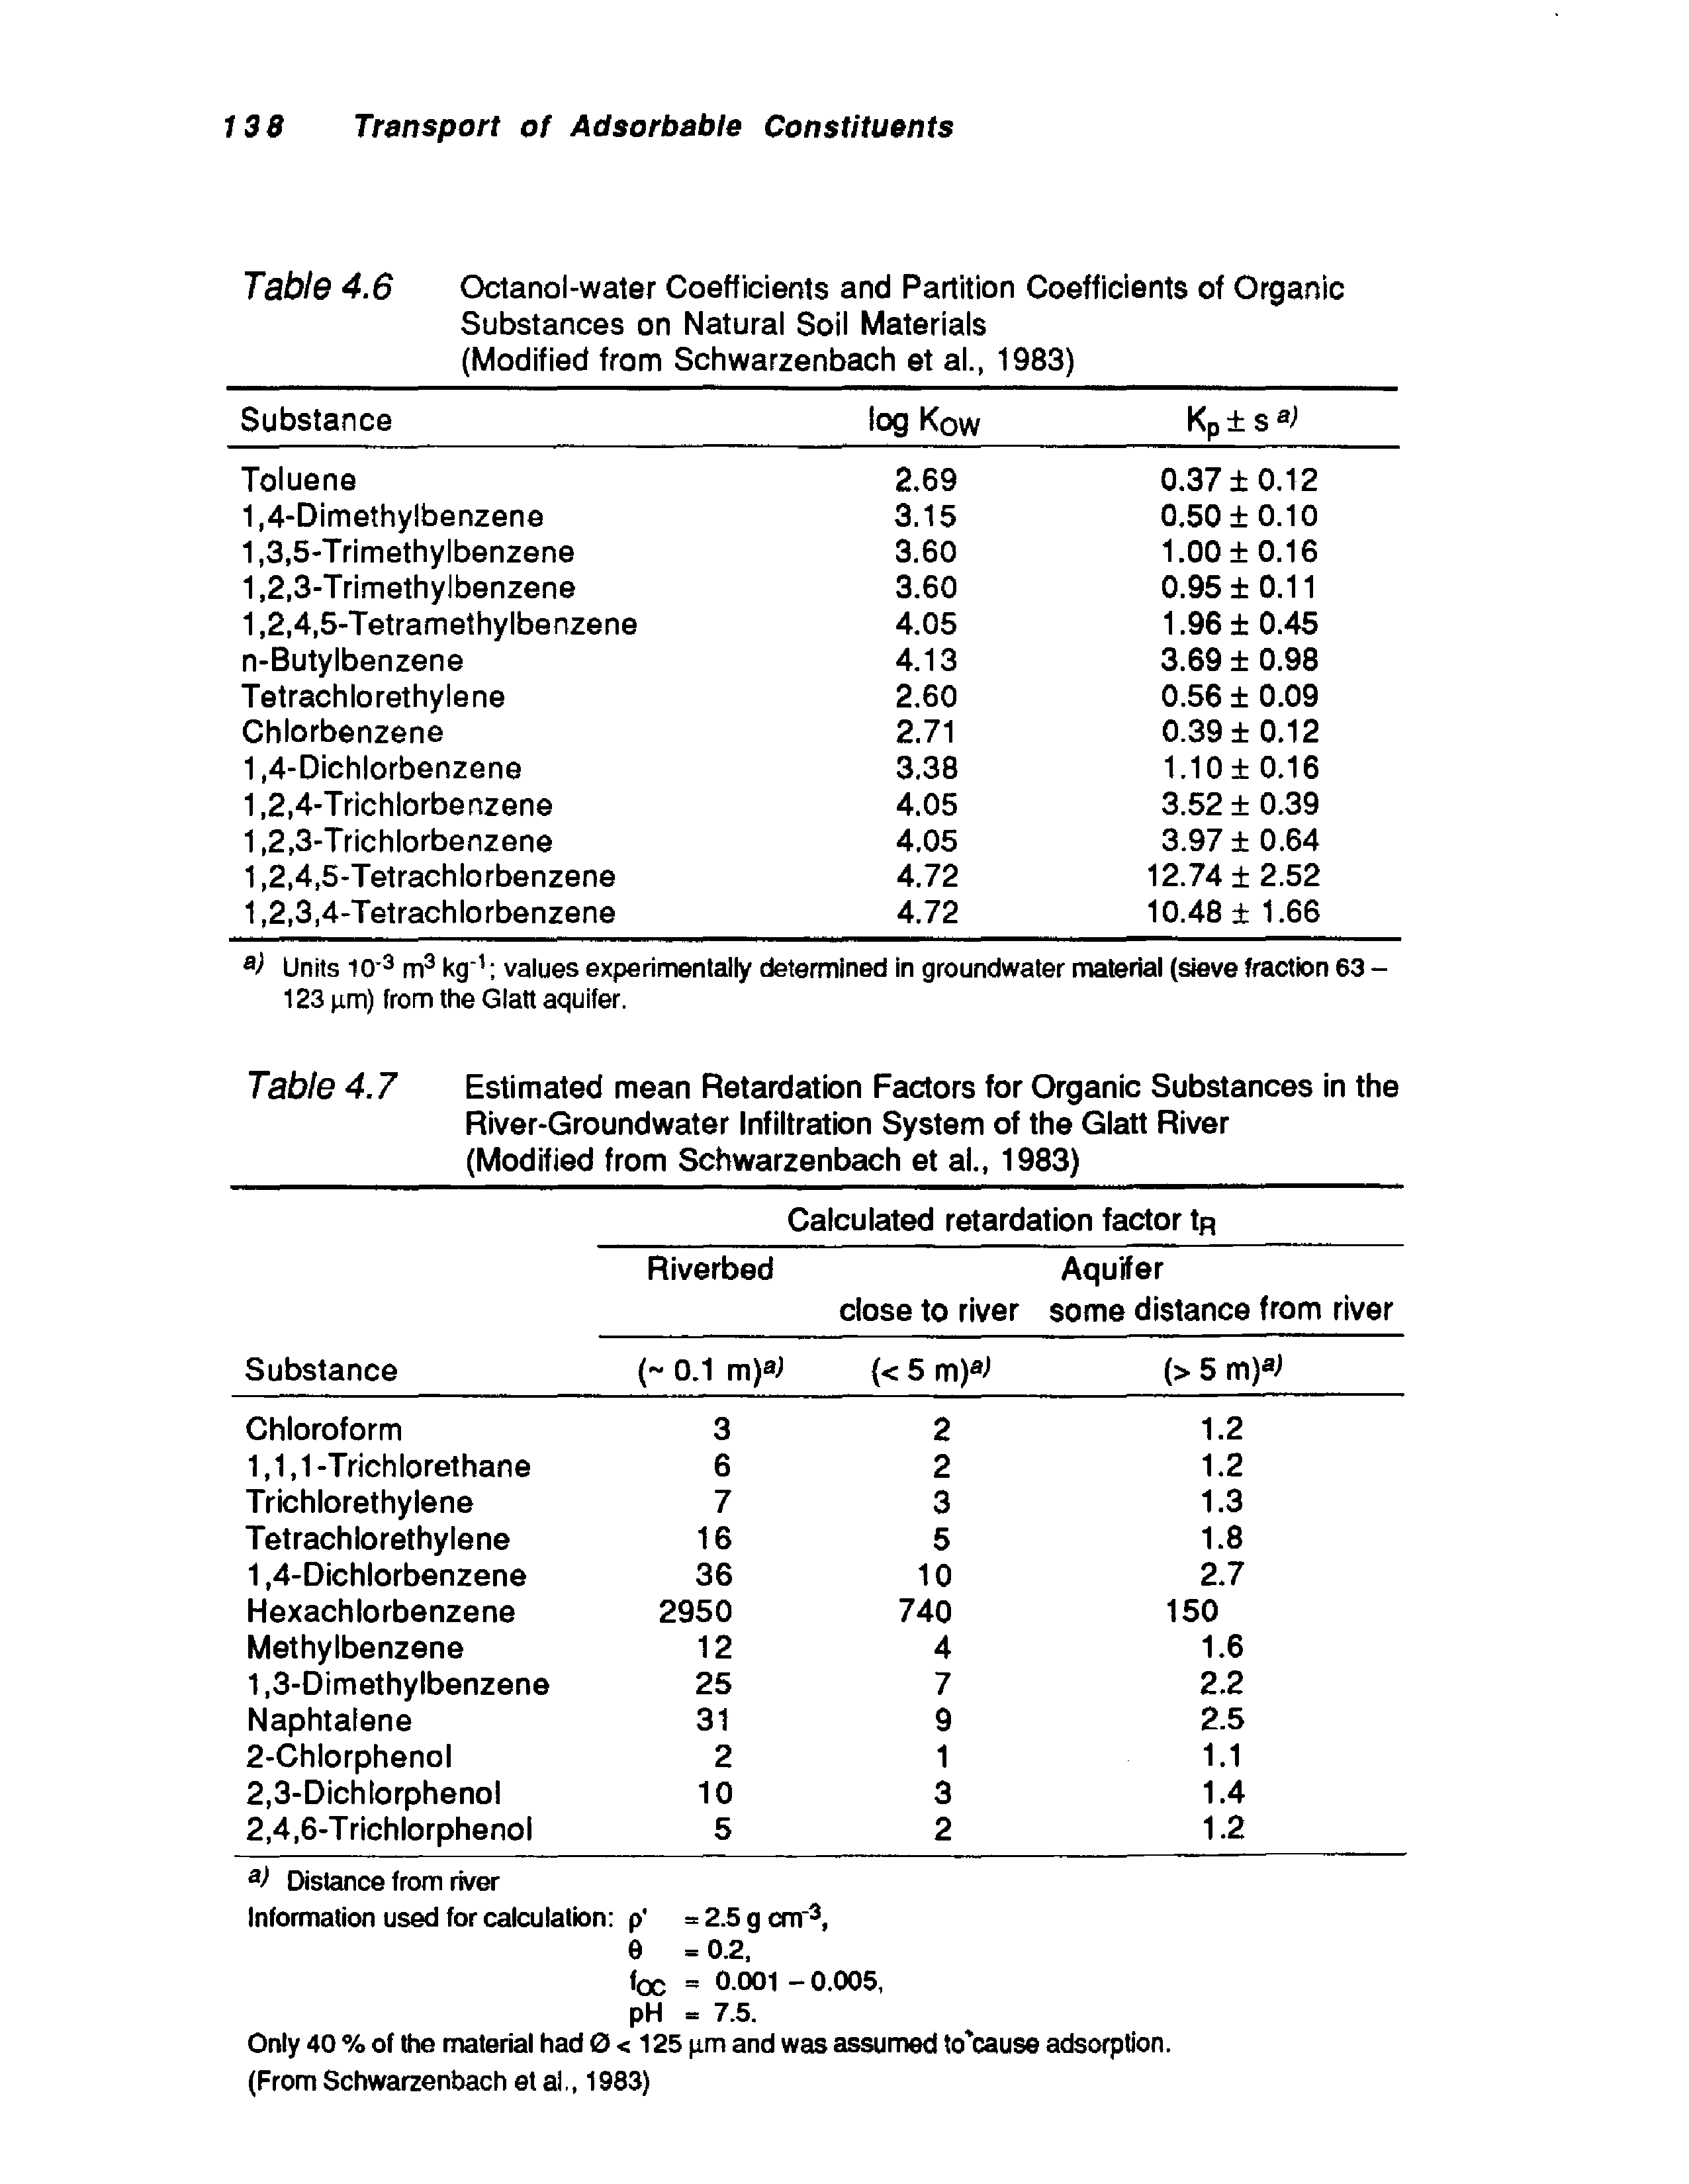 Table 4.7 Estimated mean Retardation Factors for Organic Substances in the River-Groundwater Infiltration System of the Glatt River (Modified from Schwarzenbach et al., 1983)...